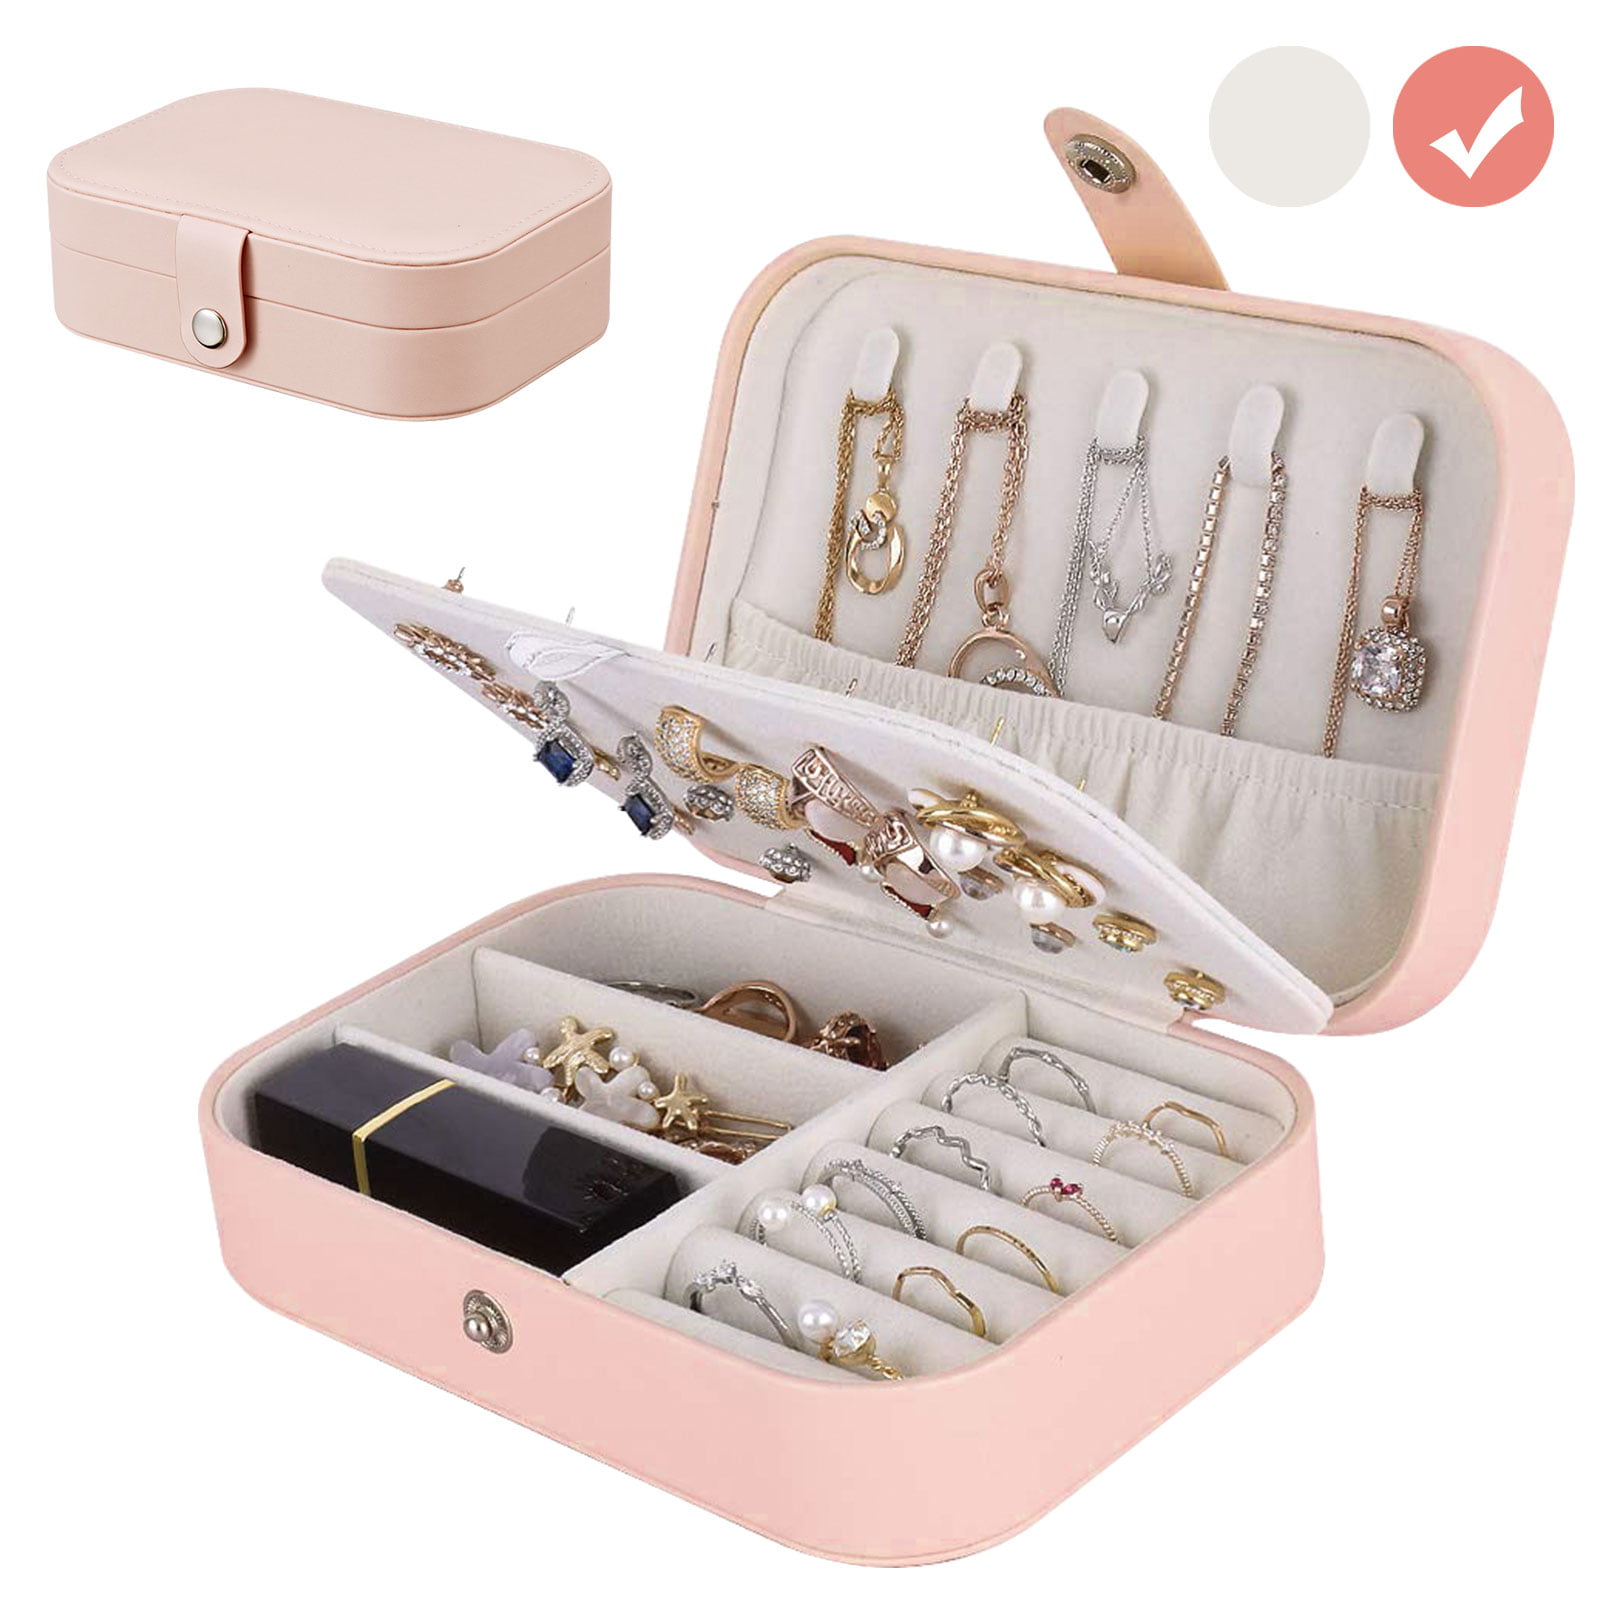 Details about   Jewelry Box Ring Earring Necklace Storage Case Travel Organizer Pink Women Gift